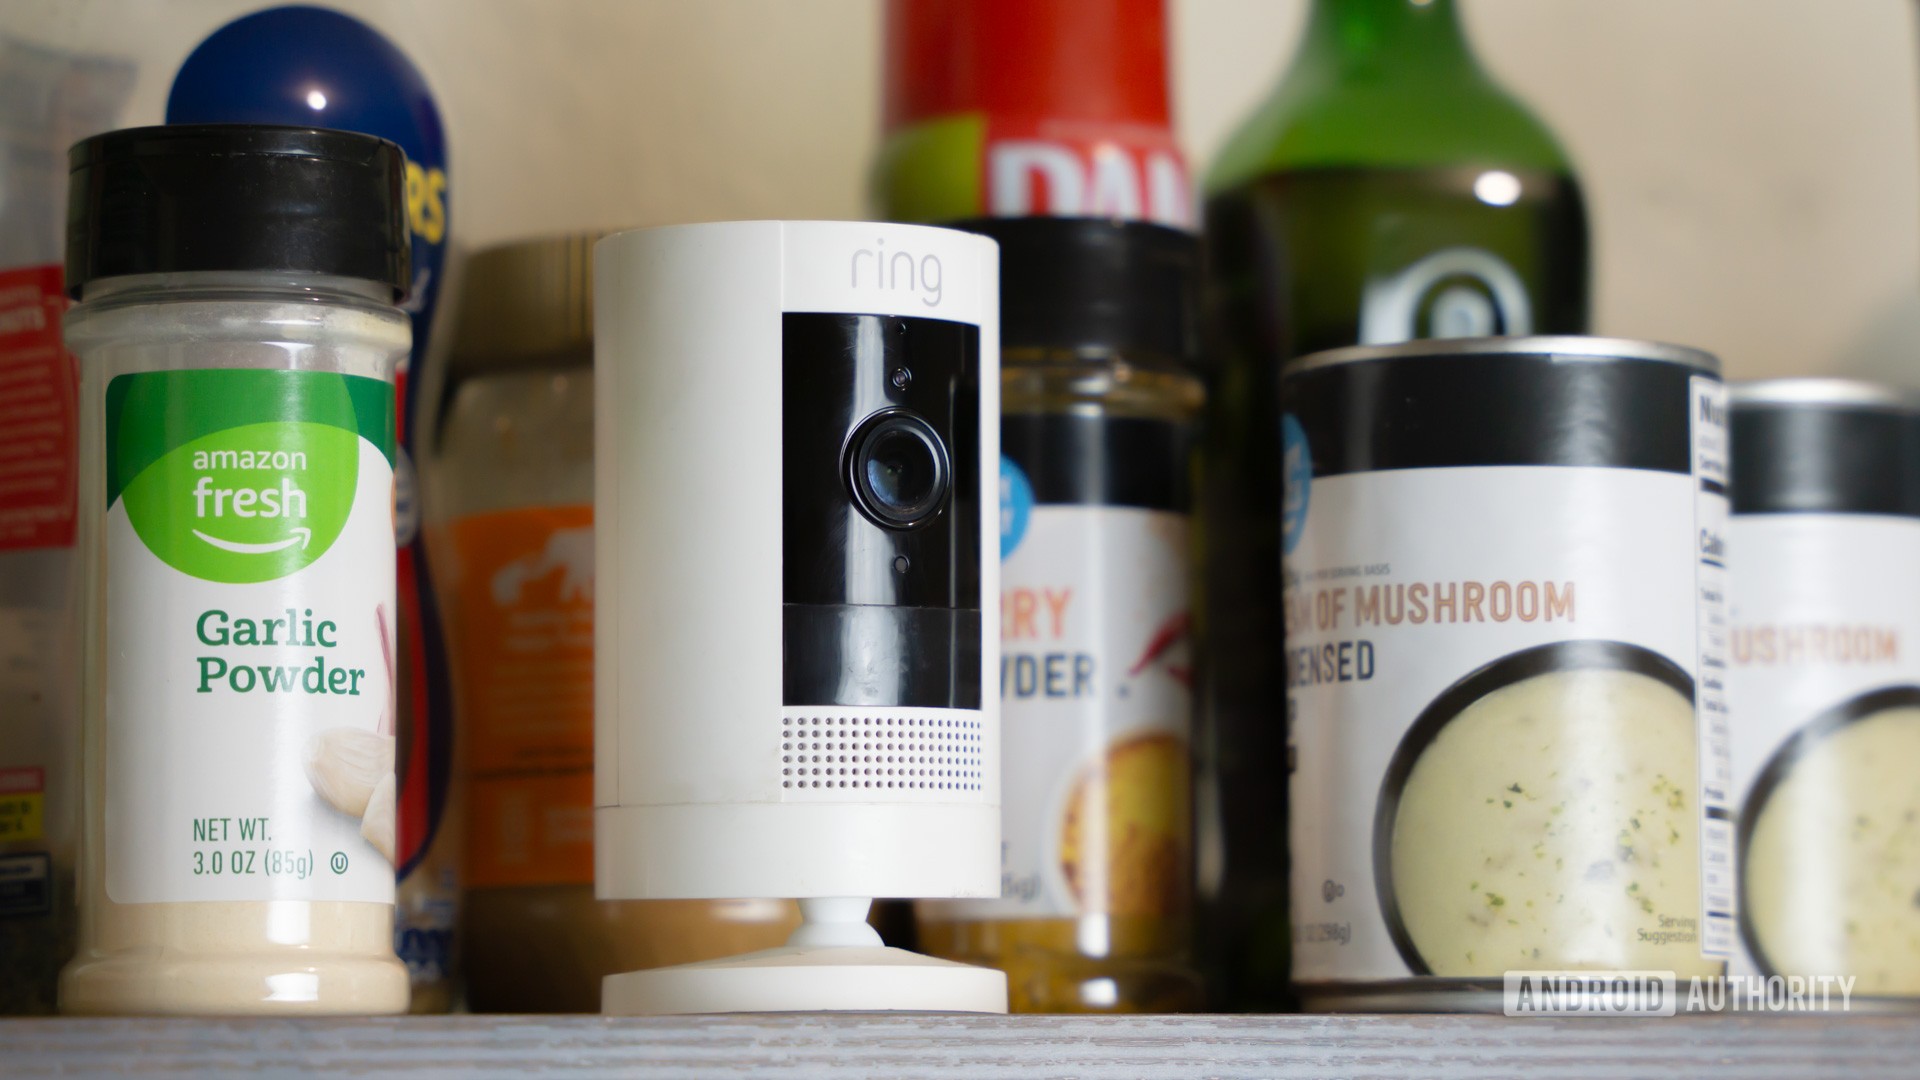 Ring camera next to spices, cans, and more kitchen items stock photo (1)